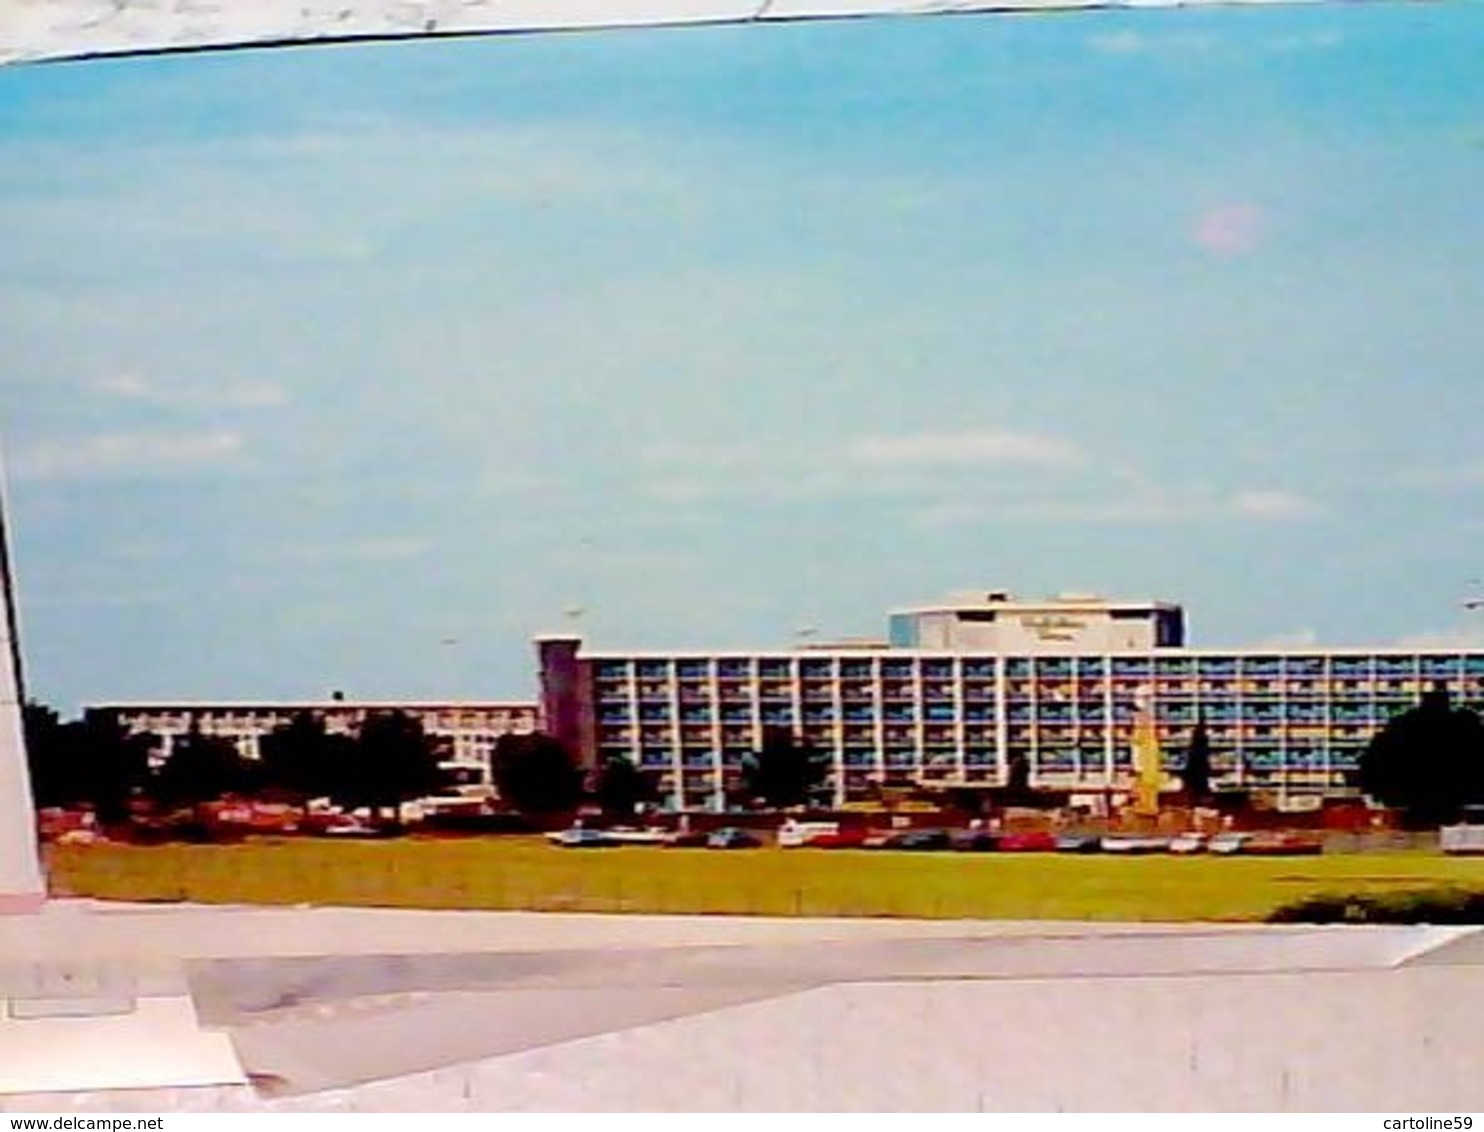 RSA SOUTH AFRICA - Johannesburg Jan Smuts Airport AEROPORTO With Aholiday Inn N1970 HB8467 - Sud Africa